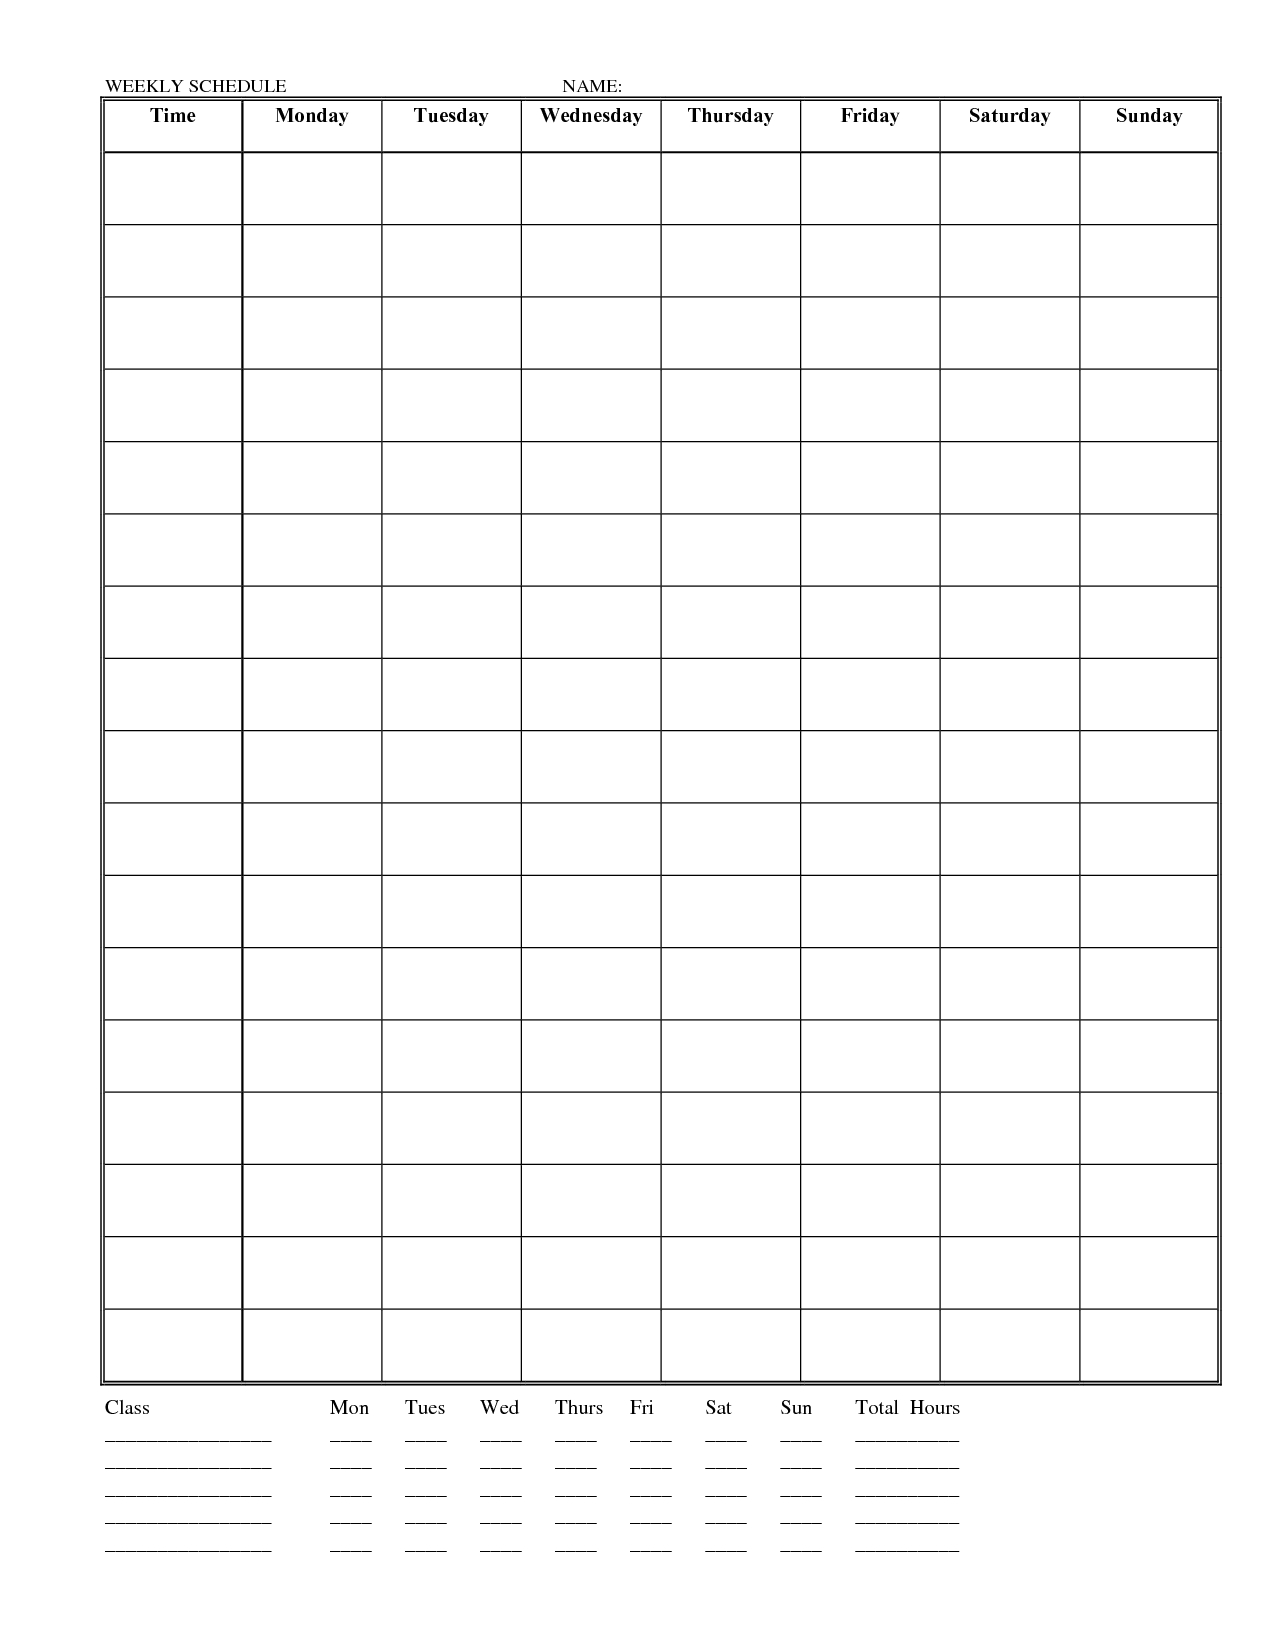 Schedule Worksheet Templates | Printable Worksheets And intended for Printable 15 Min. Appointment Sheet 8-6